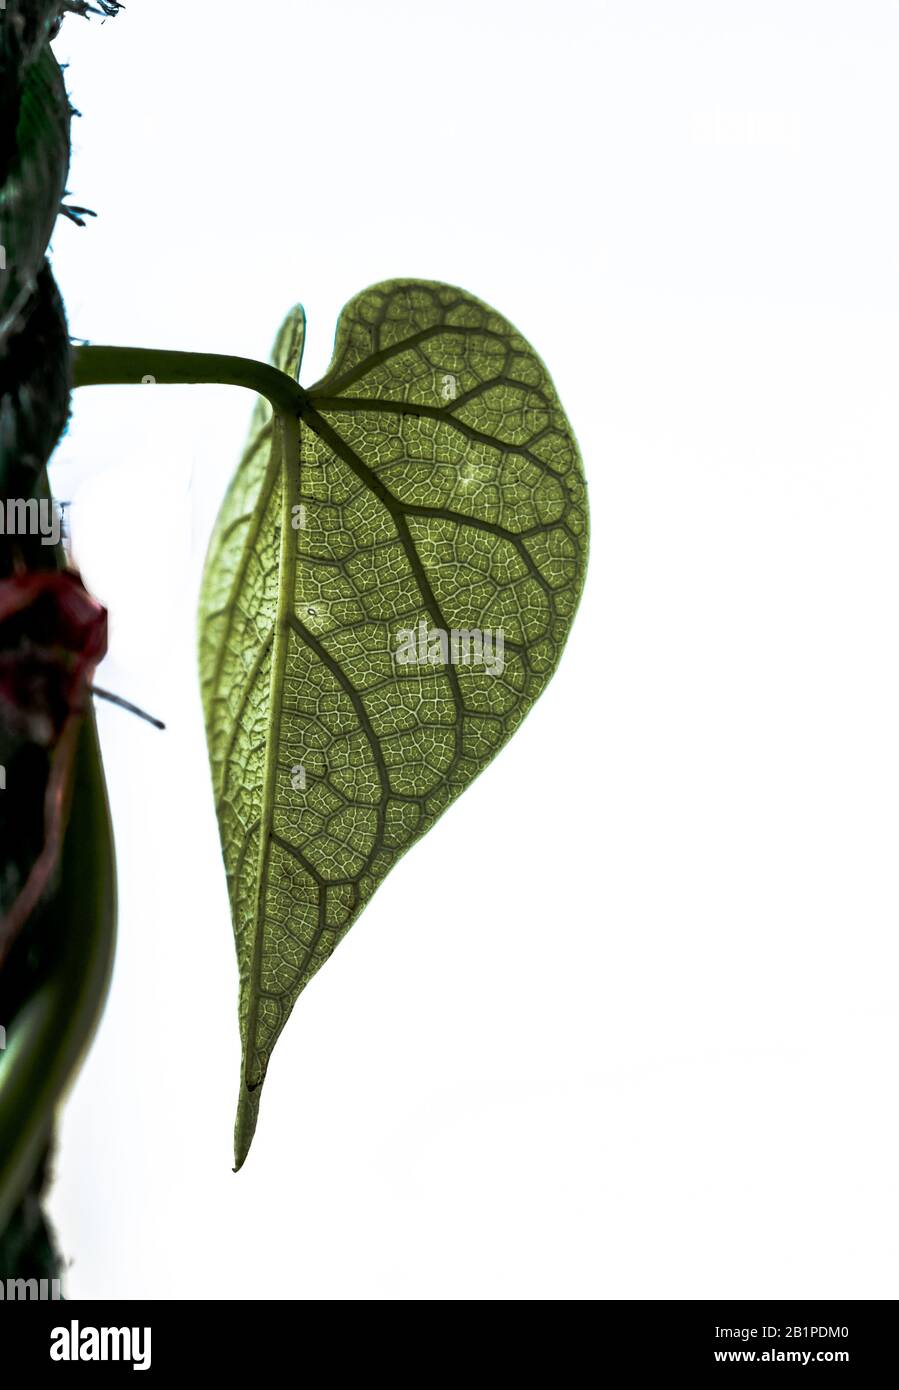 Beautiful detailed photo of fresh leaf of ayurvedic giloya plant, with visible skeleton of lateral veins and division from midrib. Botany Image. Stock Photo